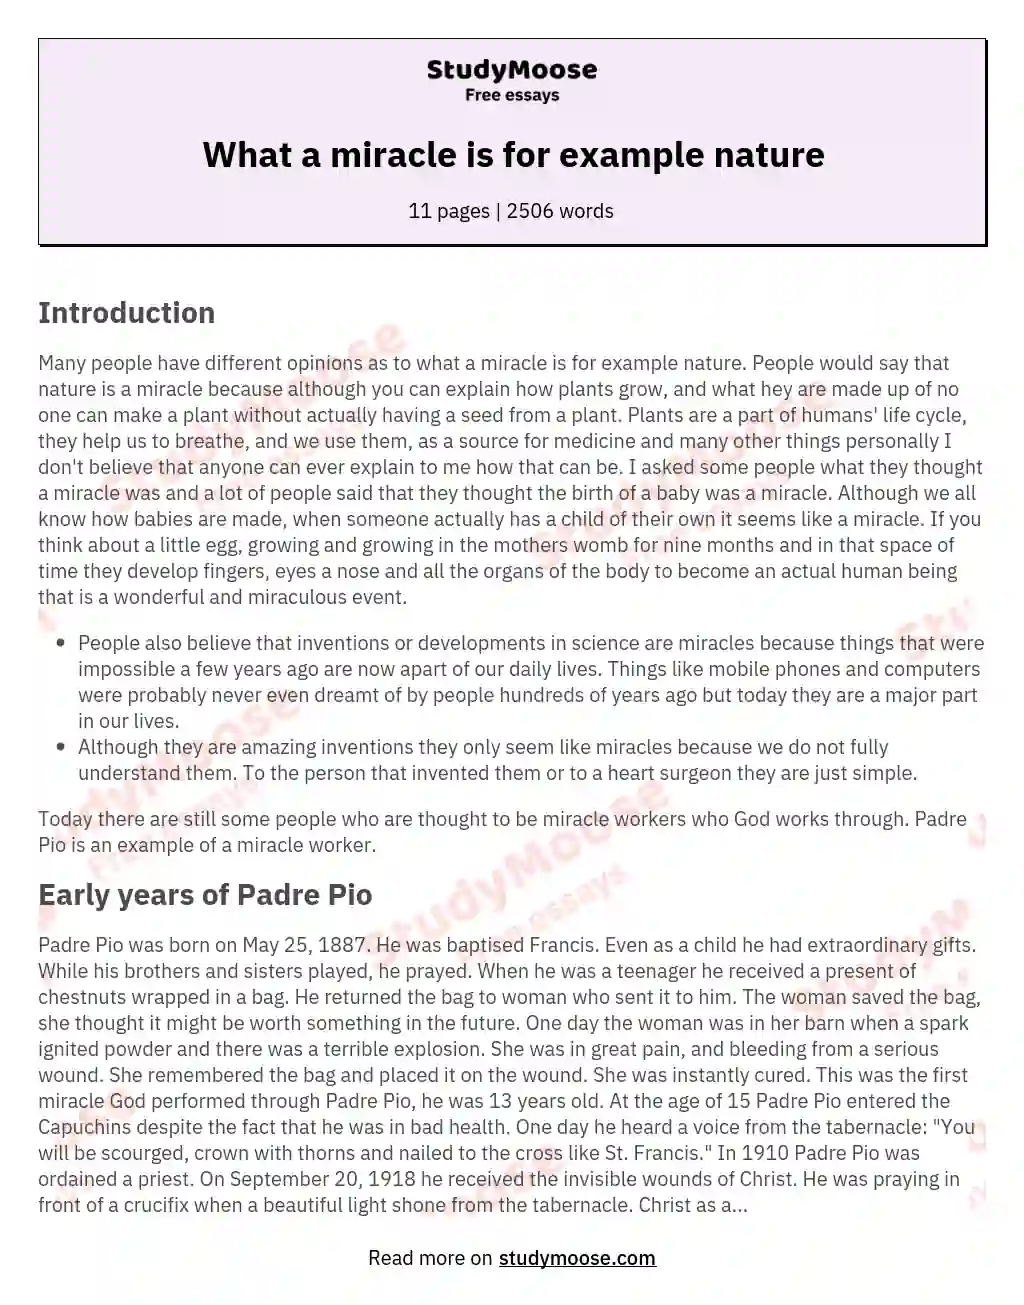 What a miracle is for example nature essay